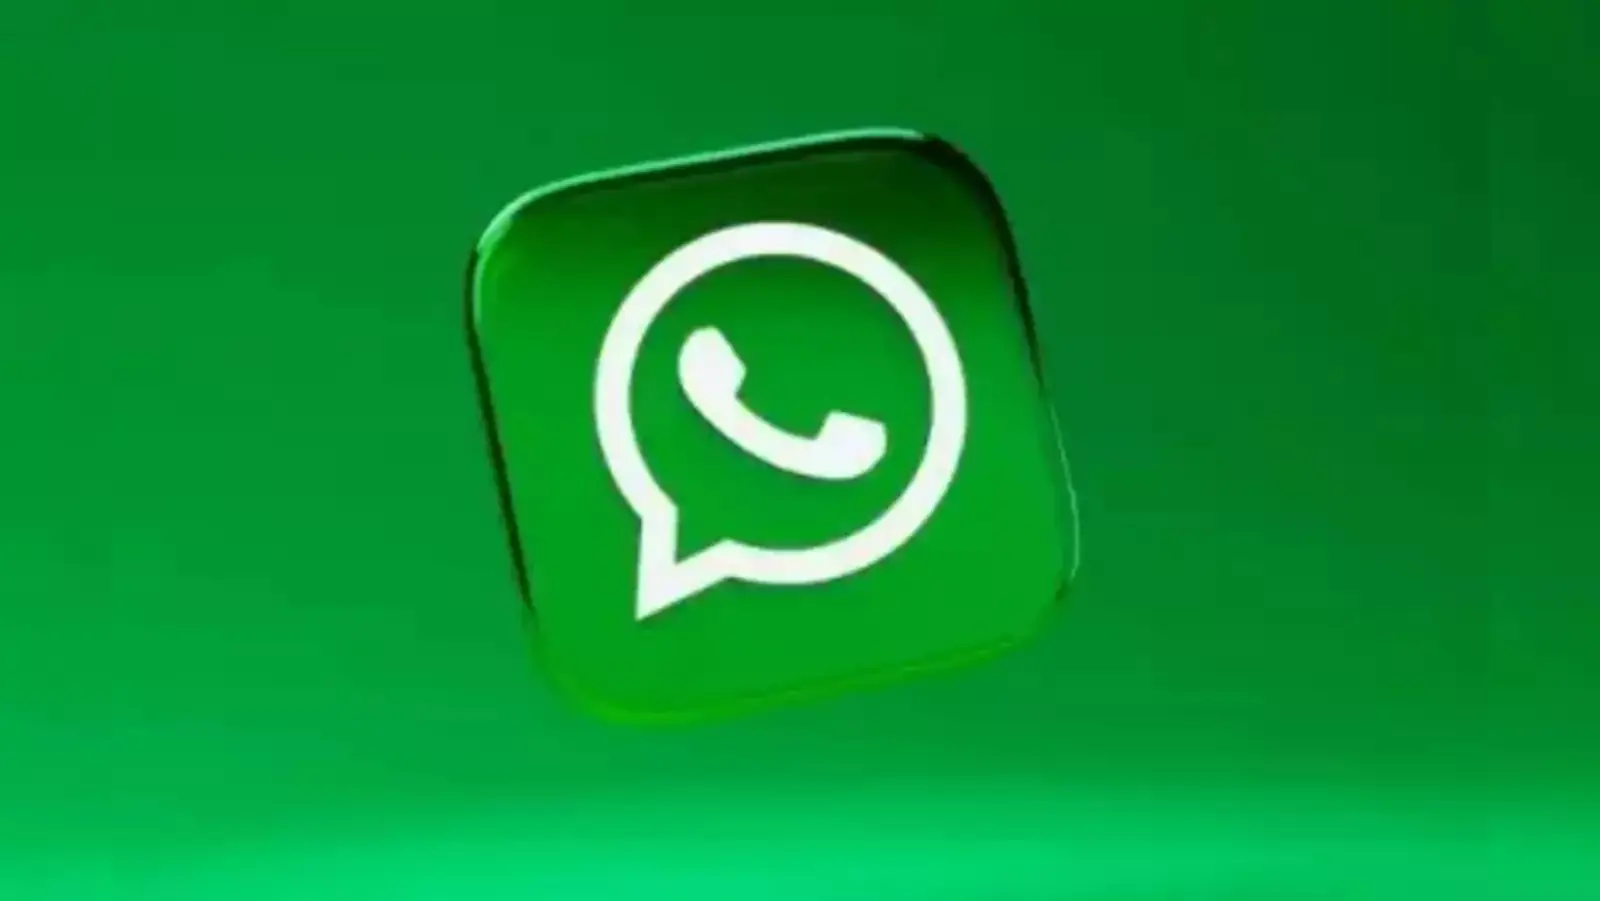 WhatsApp's green tick is going to change, checkmark will be available in new color